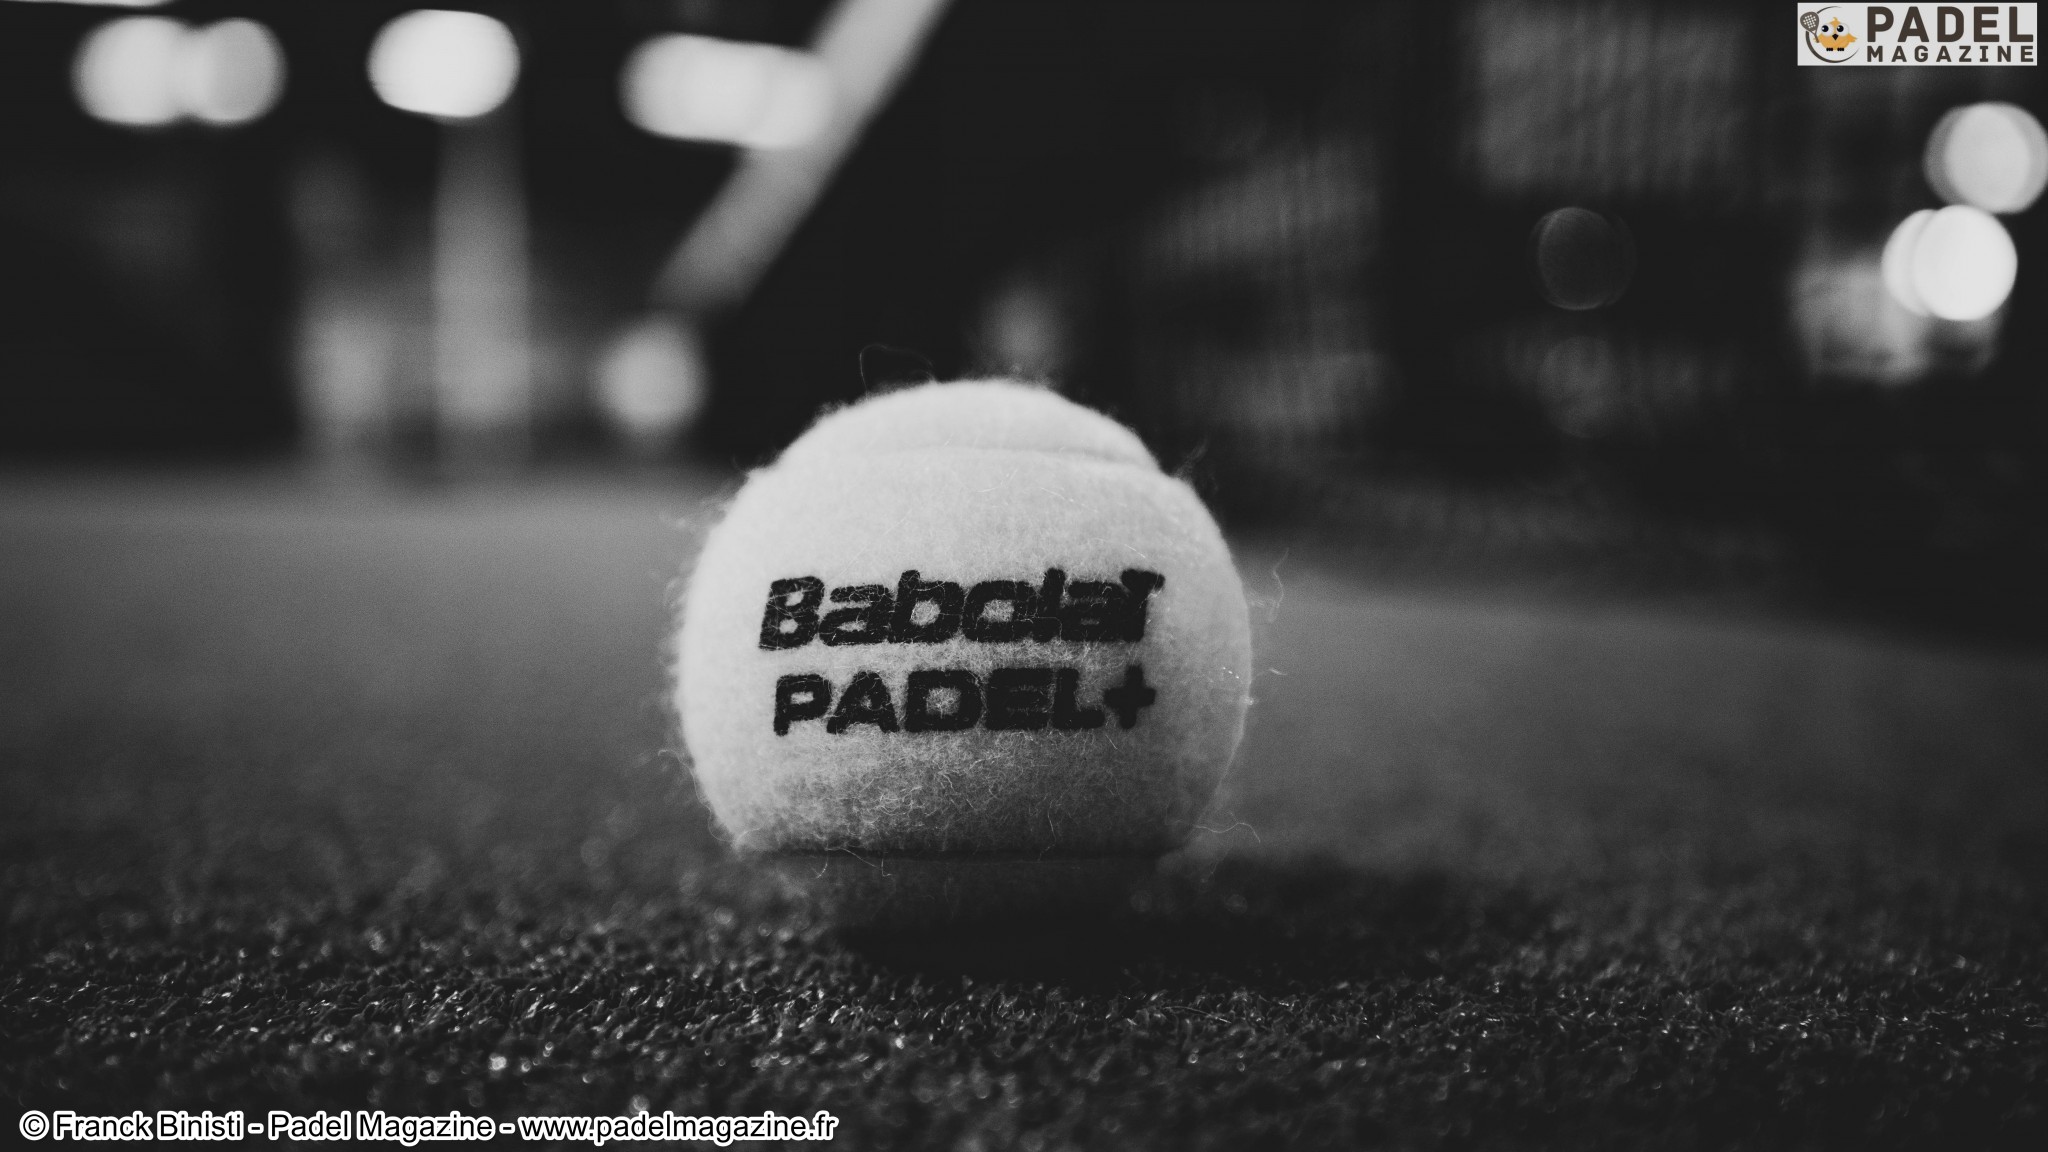 Objective: To create padel